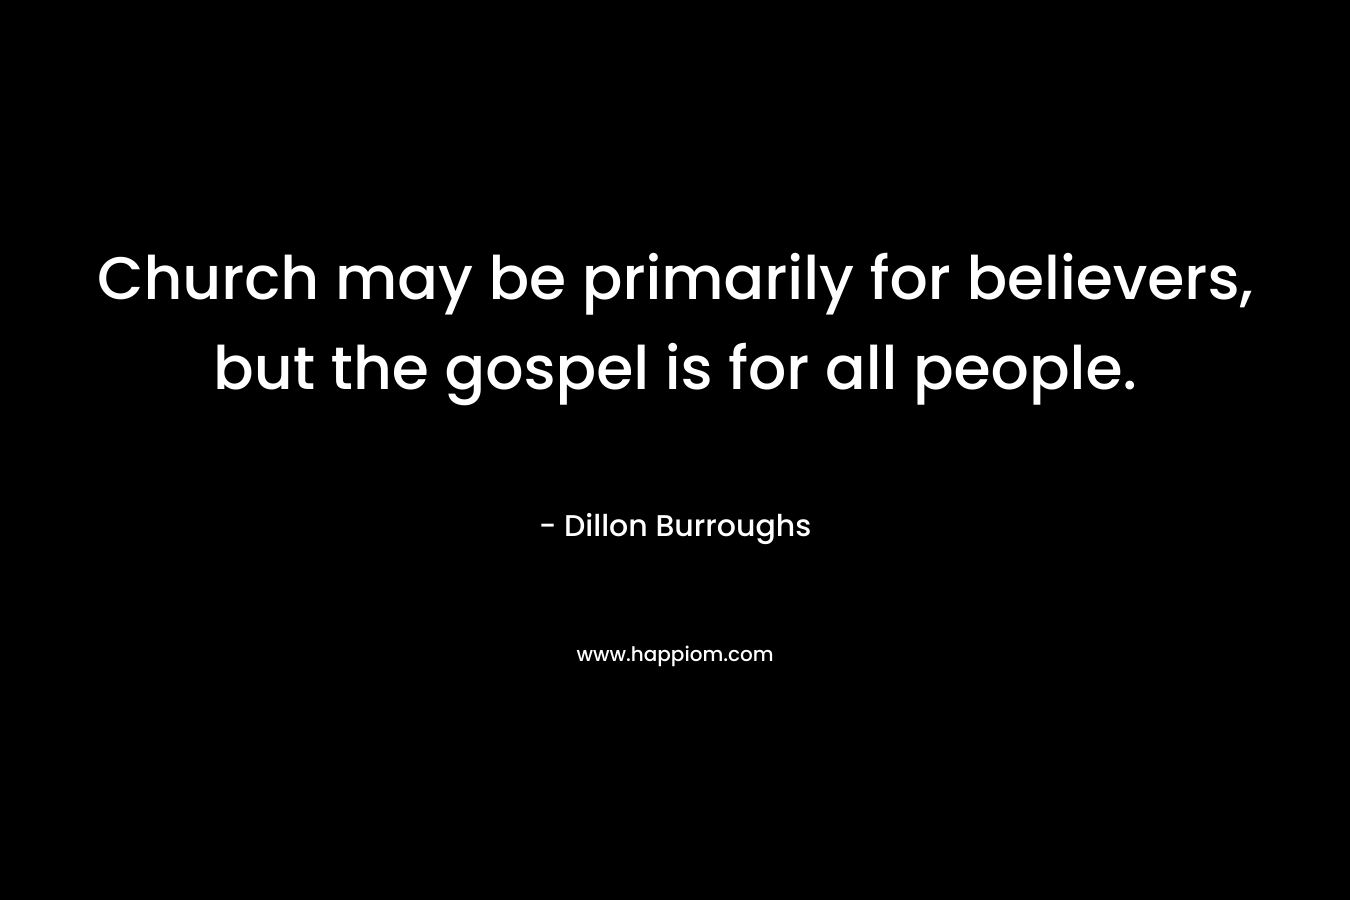 Church may be primarily for believers, but the gospel is for all people. – Dillon Burroughs